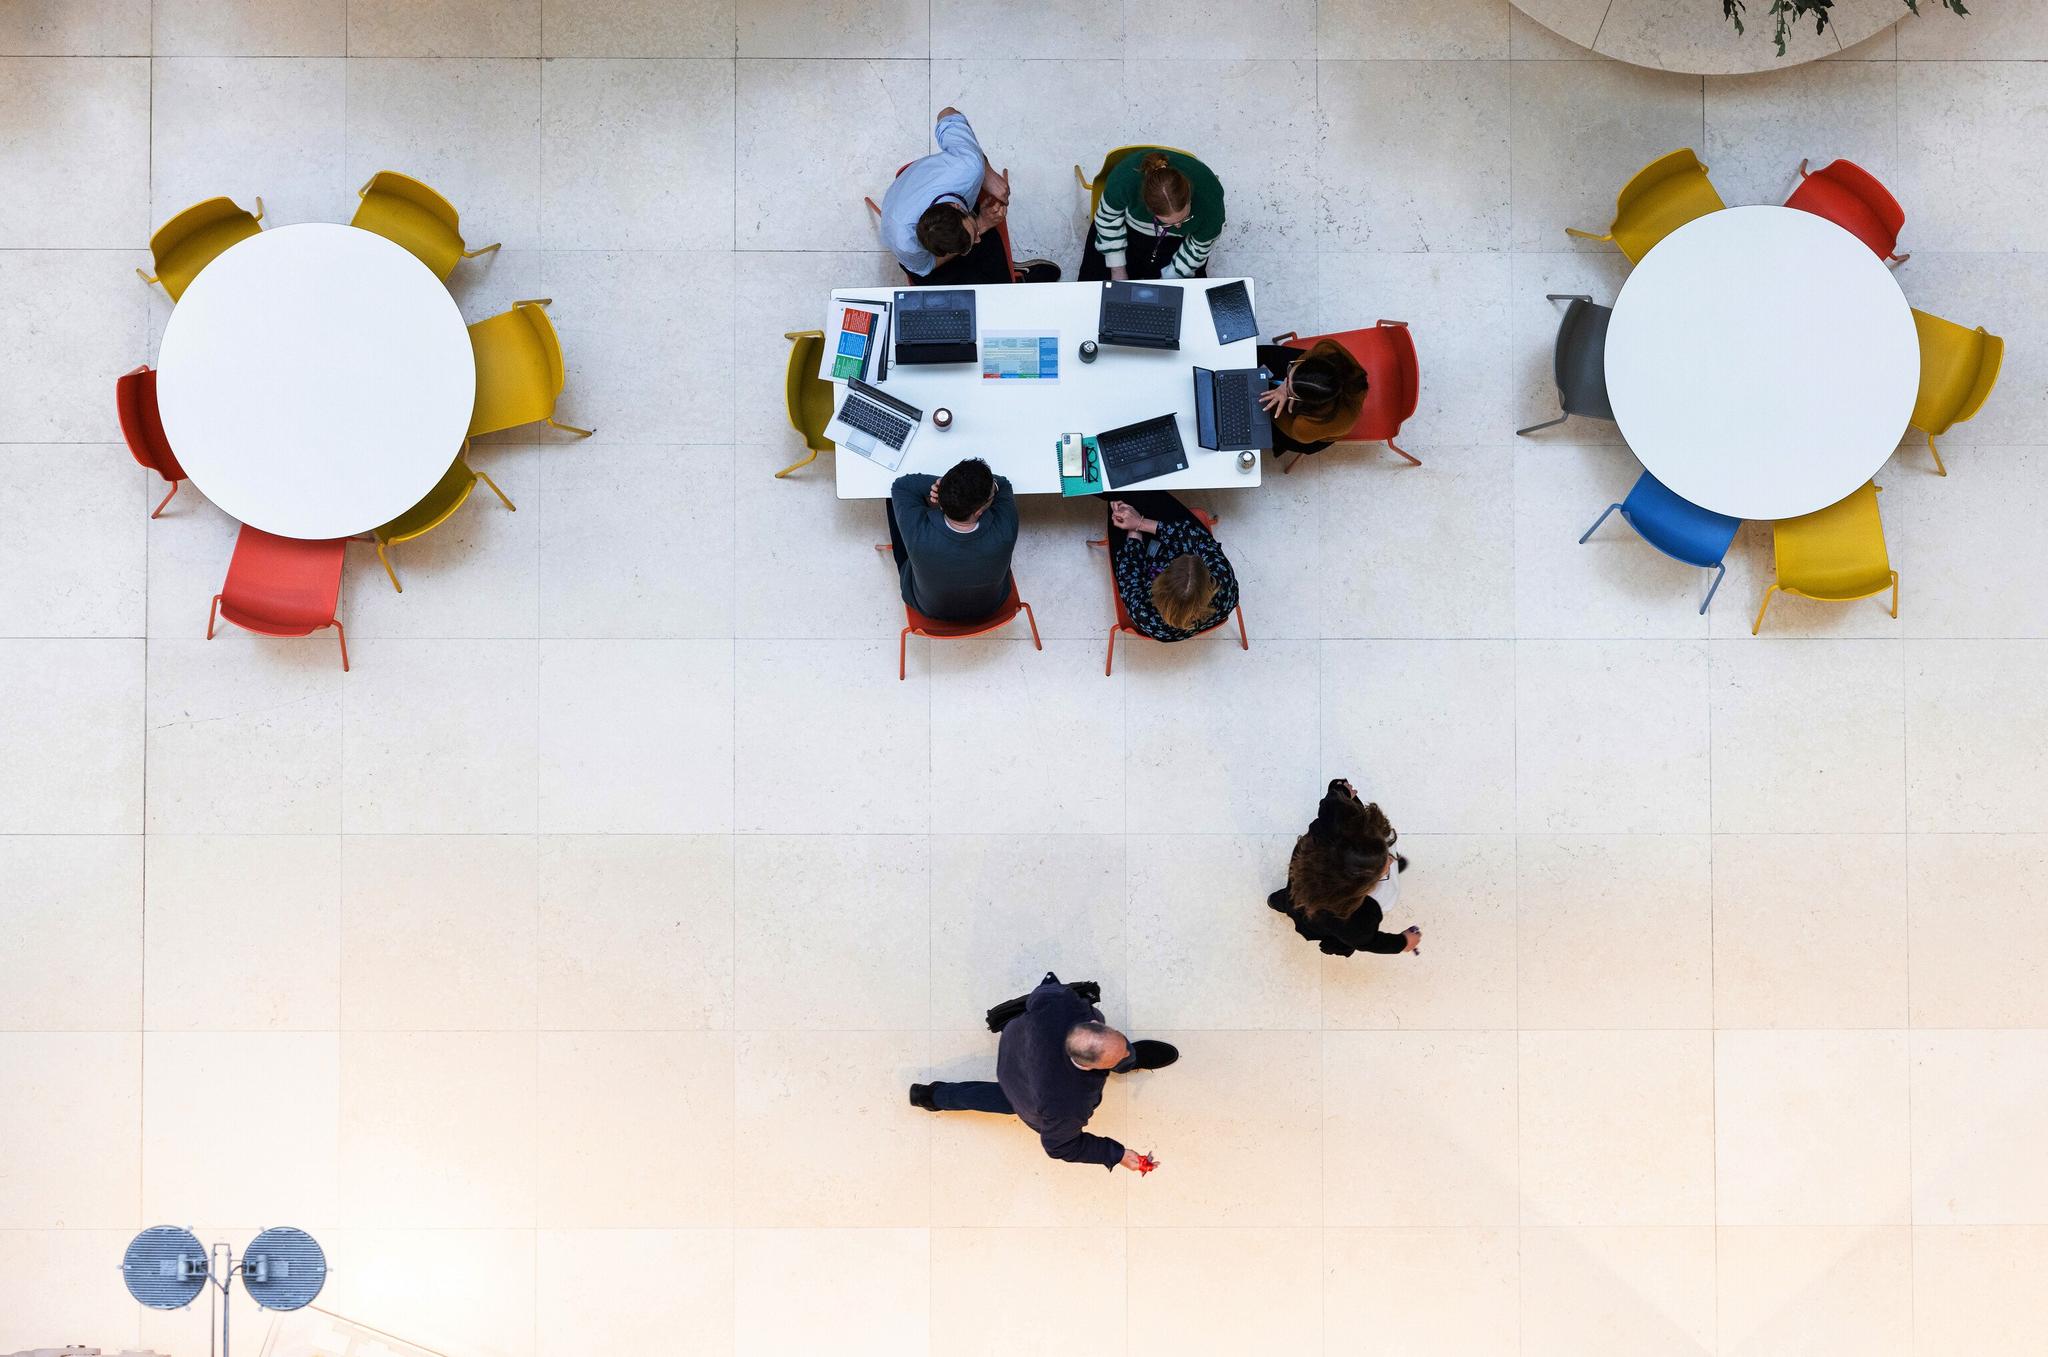 Round tables in an office environment with people working on them, seen from above